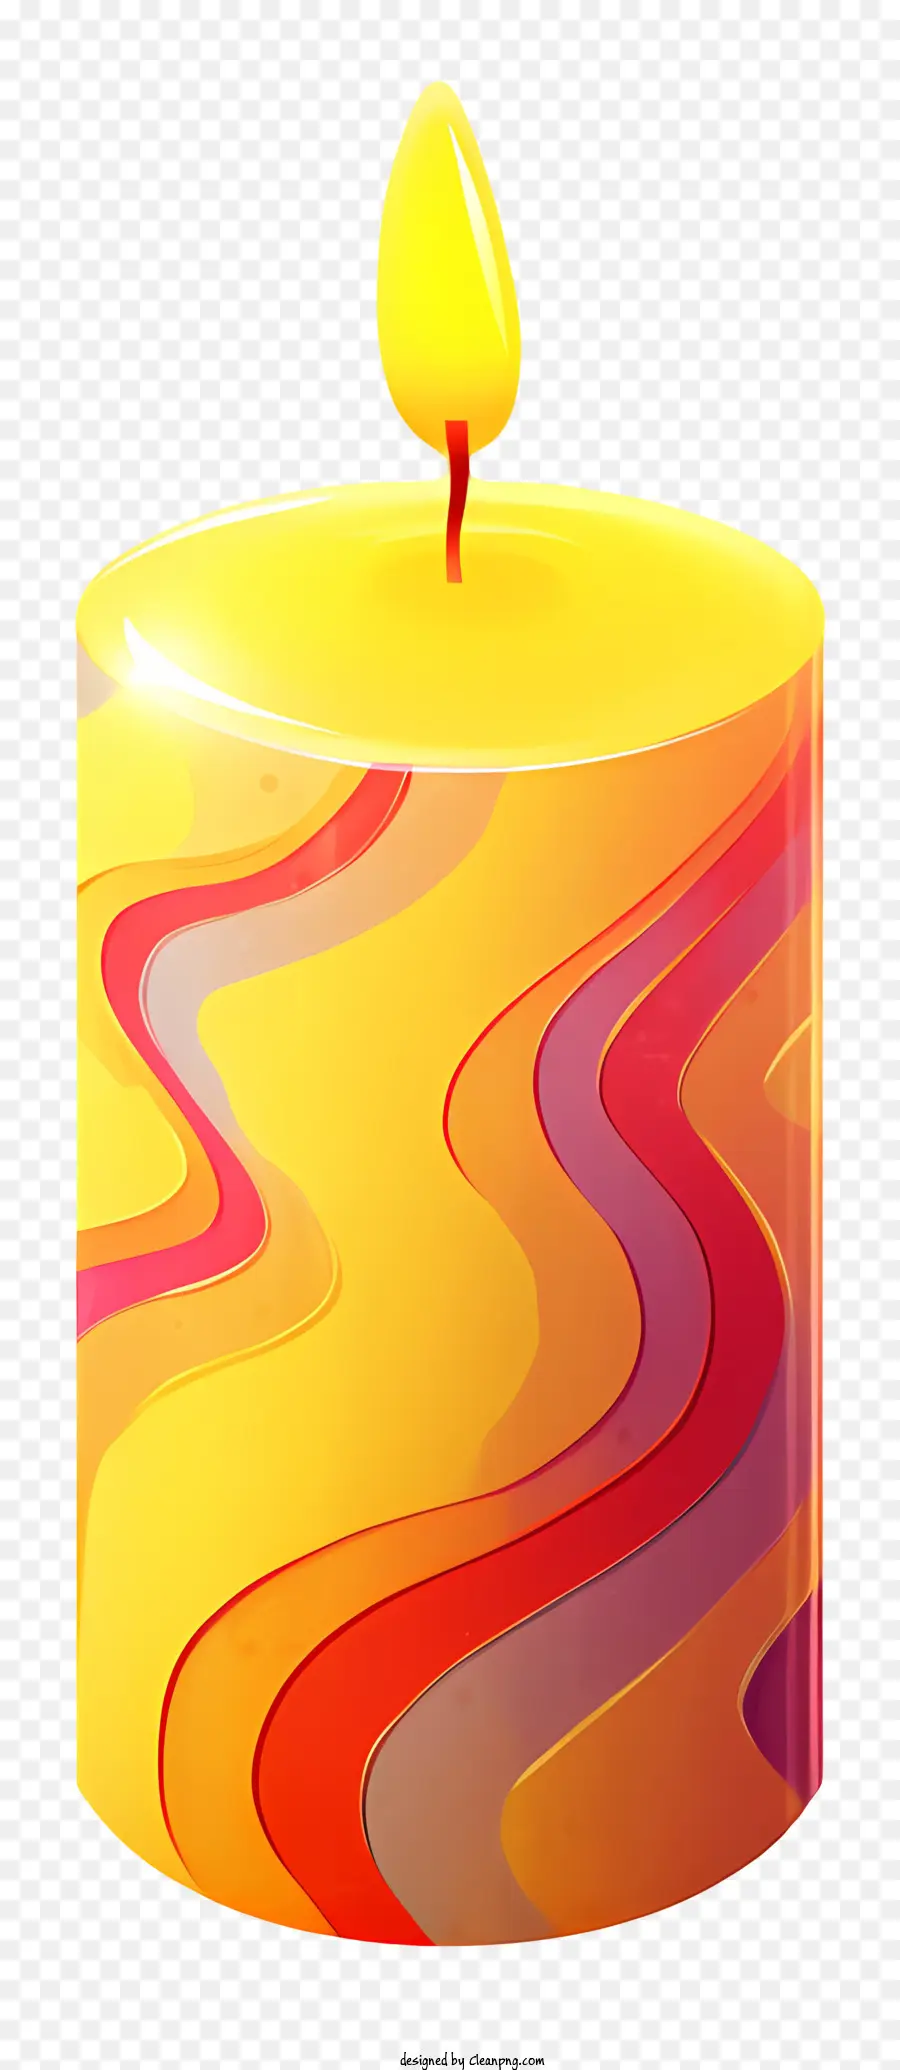 flame artwork swirling patterns glowing flame floating flames bright and colorful flames